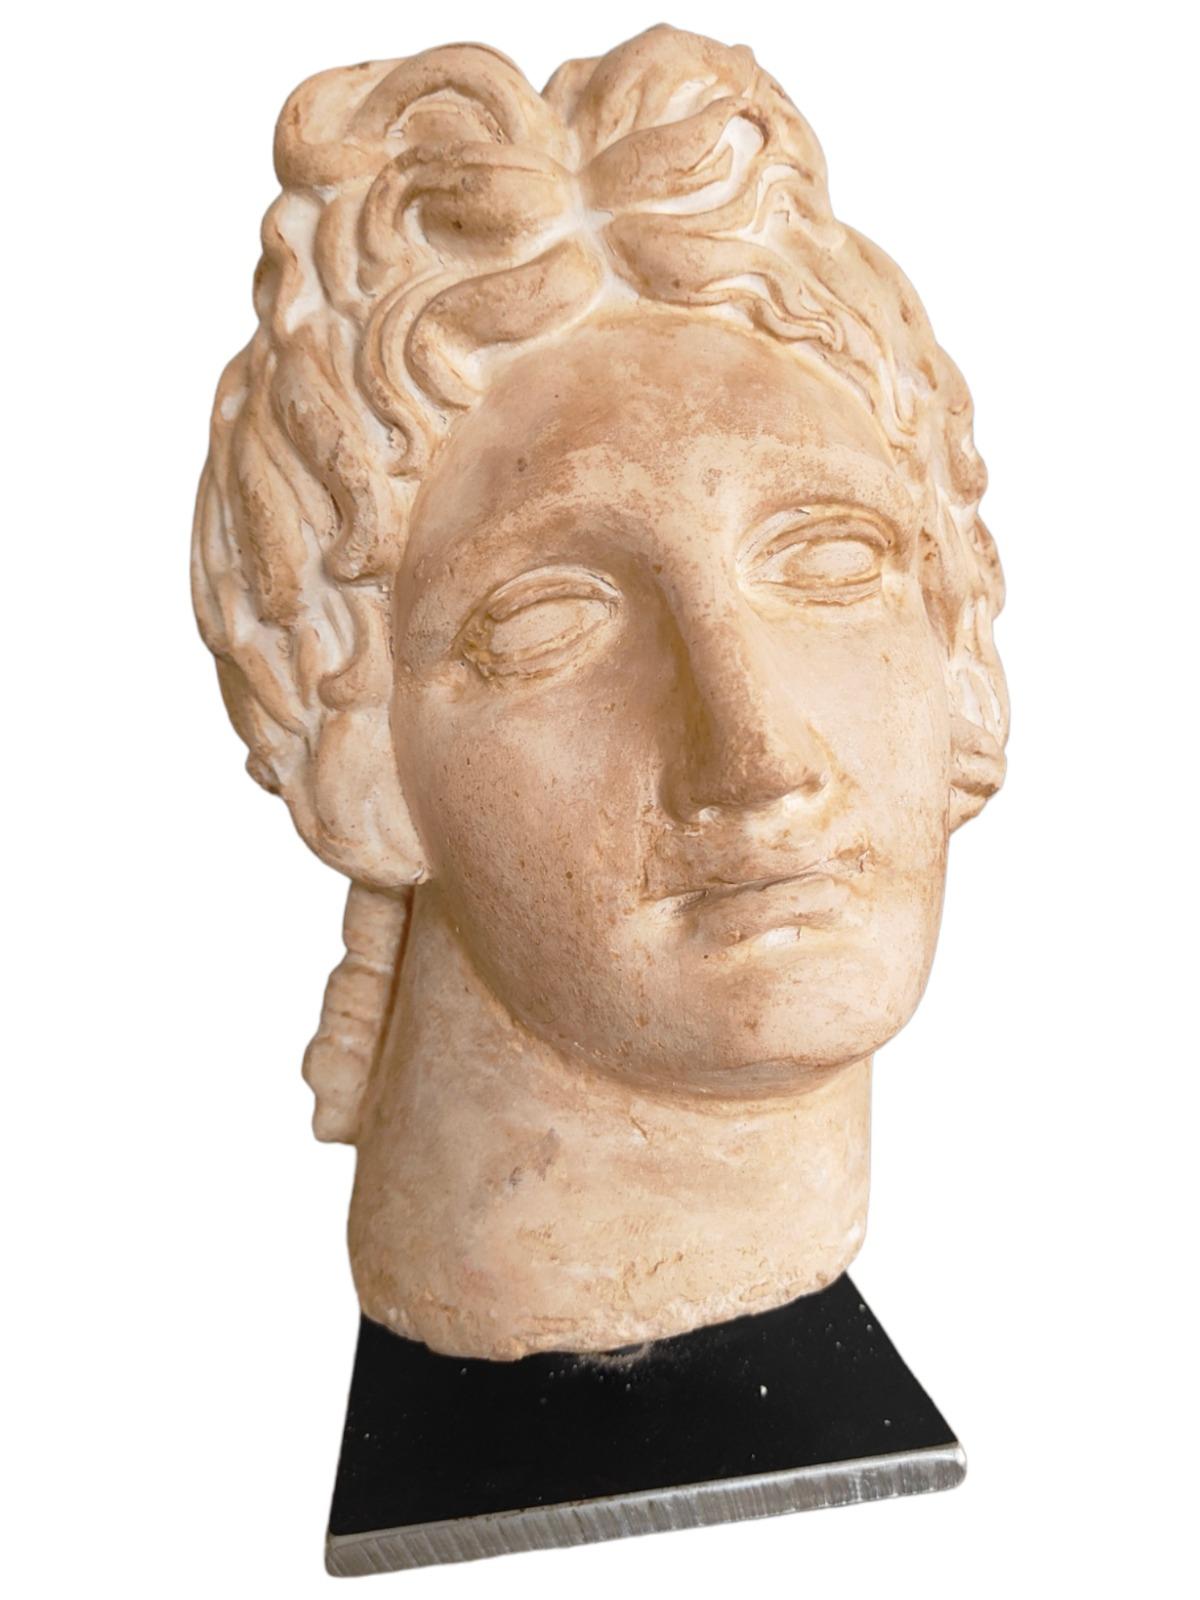 CLASSIC HEAD IN TERRACOTTA
DECORATIVE CLASSIC ROMAN HEAD MADE IN TERRACOTTA OR SIMILAR FROM THE FIRST HALF OF THE 20TH CENTURY. MEASURES: 32 CM HIGH
good condition.